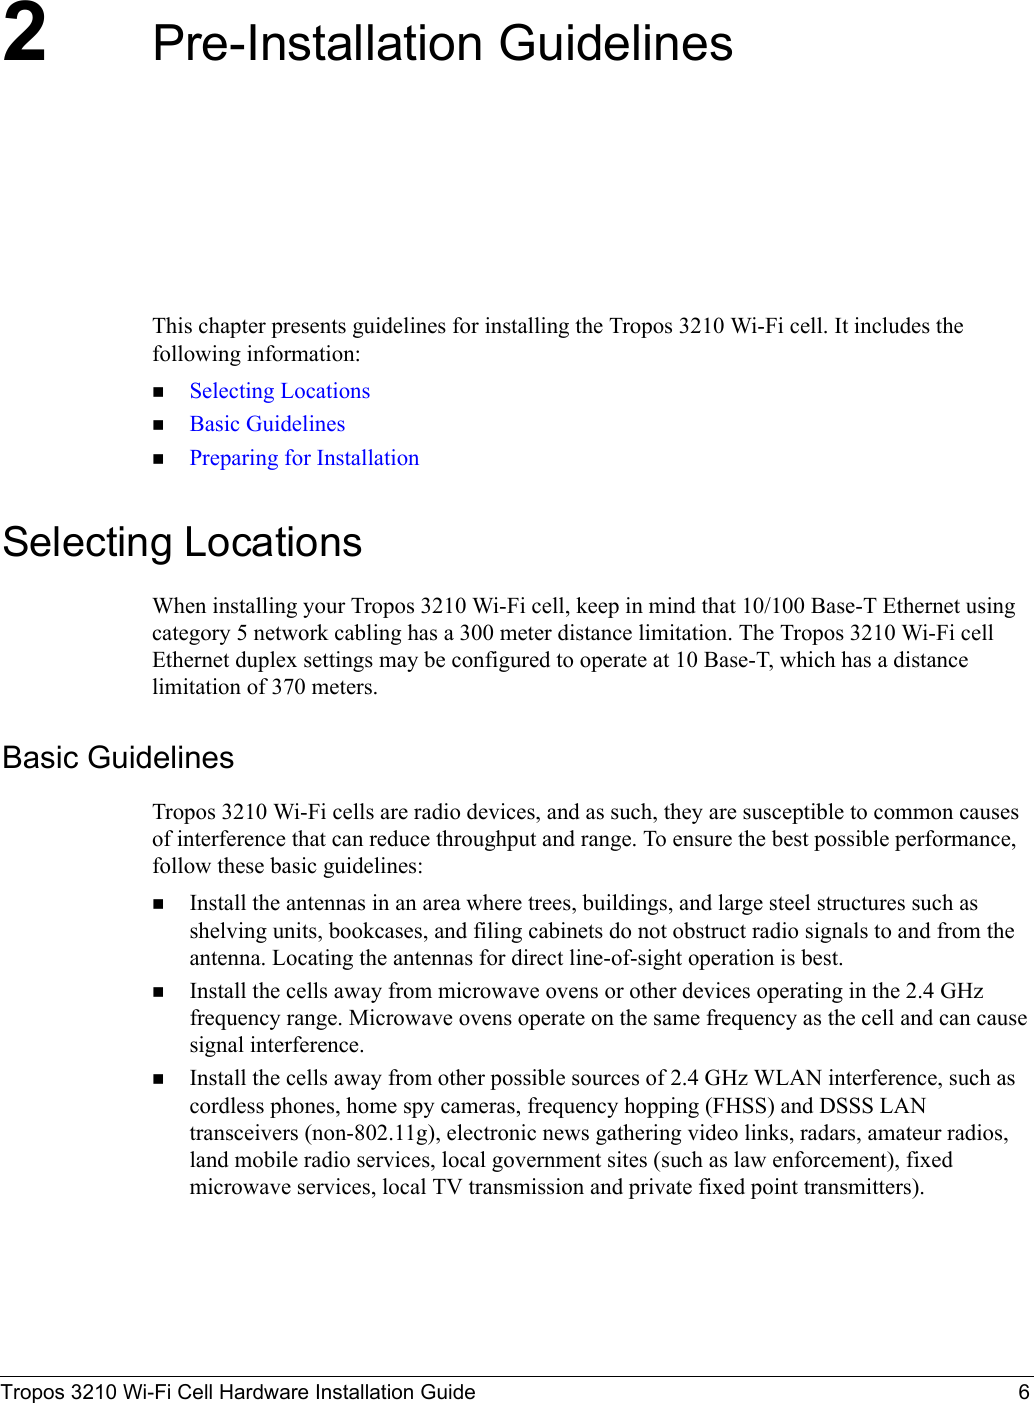 Tropos 3210 Wi-Fi Cell Hardware Installation Guide 62Pre-Installation GuidelinesThis chapter presents guidelines for installing the Tropos 3210 Wi-Fi cell. It includes the following information:Selecting LocationsBasic GuidelinesPreparing for InstallationSelecting LocationsWhen installing your Tropos 3210 Wi-Fi cell, keep in mind that 10/100 Base-T Ethernet using category 5 network cabling has a 300 meter distance limitation. The Tropos 3210 Wi-Fi cell Ethernet duplex settings may be configured to operate at 10 Base-T, which has a distance limitation of 370 meters.Basic GuidelinesTropos 3210 Wi-Fi cells are radio devices, and as such, they are susceptible to common causes of interference that can reduce throughput and range. To ensure the best possible performance, follow these basic guidelines:Install the antennas in an area where trees, buildings, and large steel structures such as shelving units, bookcases, and filing cabinets do not obstruct radio signals to and from the antenna. Locating the antennas for direct line-of-sight operation is best. Install the cells away from microwave ovens or other devices operating in the 2.4 GHz frequency range. Microwave ovens operate on the same frequency as the cell and can cause signal interference. Install the cells away from other possible sources of 2.4 GHz WLAN interference, such as cordless phones, home spy cameras, frequency hopping (FHSS) and DSSS LAN transceivers (non-802.11g), electronic news gathering video links, radars, amateur radios, land mobile radio services, local government sites (such as law enforcement), fixed microwave services, local TV transmission and private fixed point transmitters).